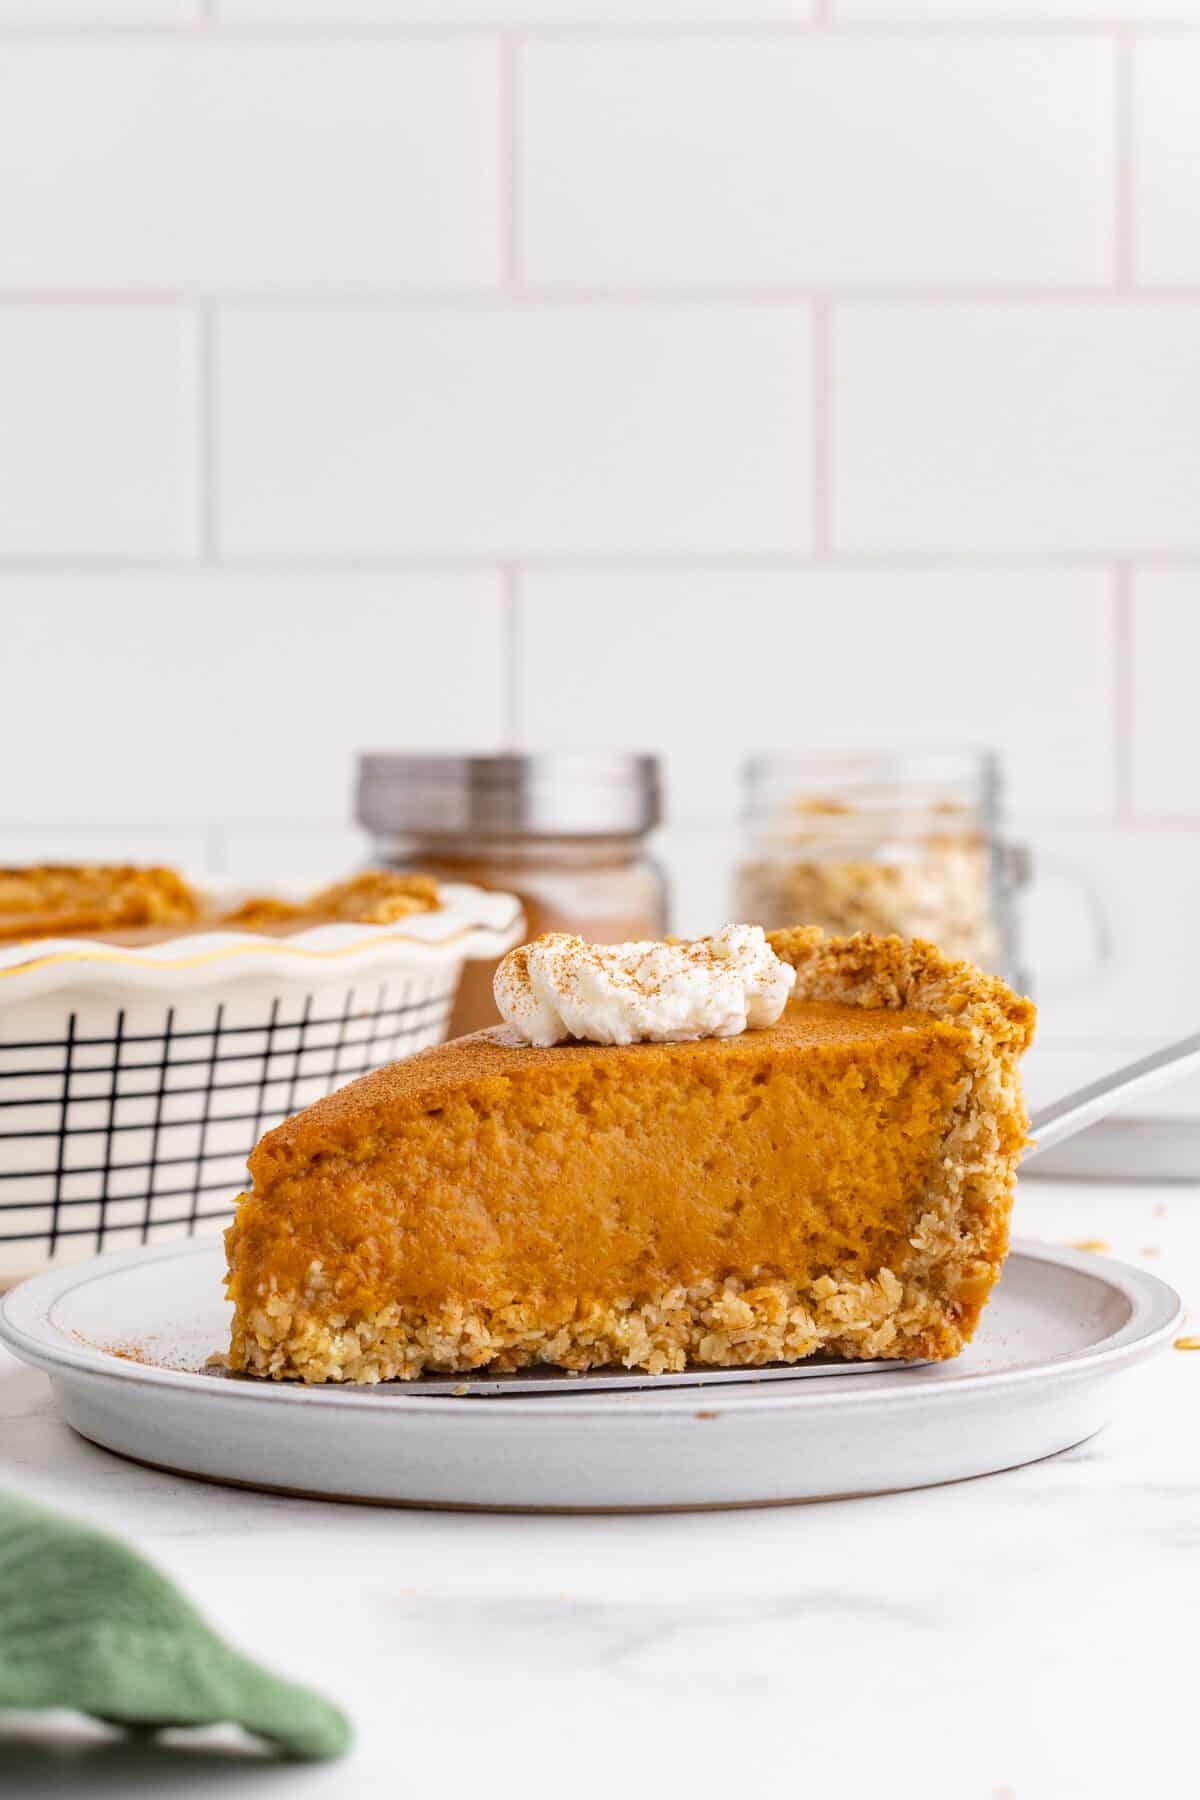 A slice of sweet potato pie with an oat crust, served with a whole pie against a background of whipped cream